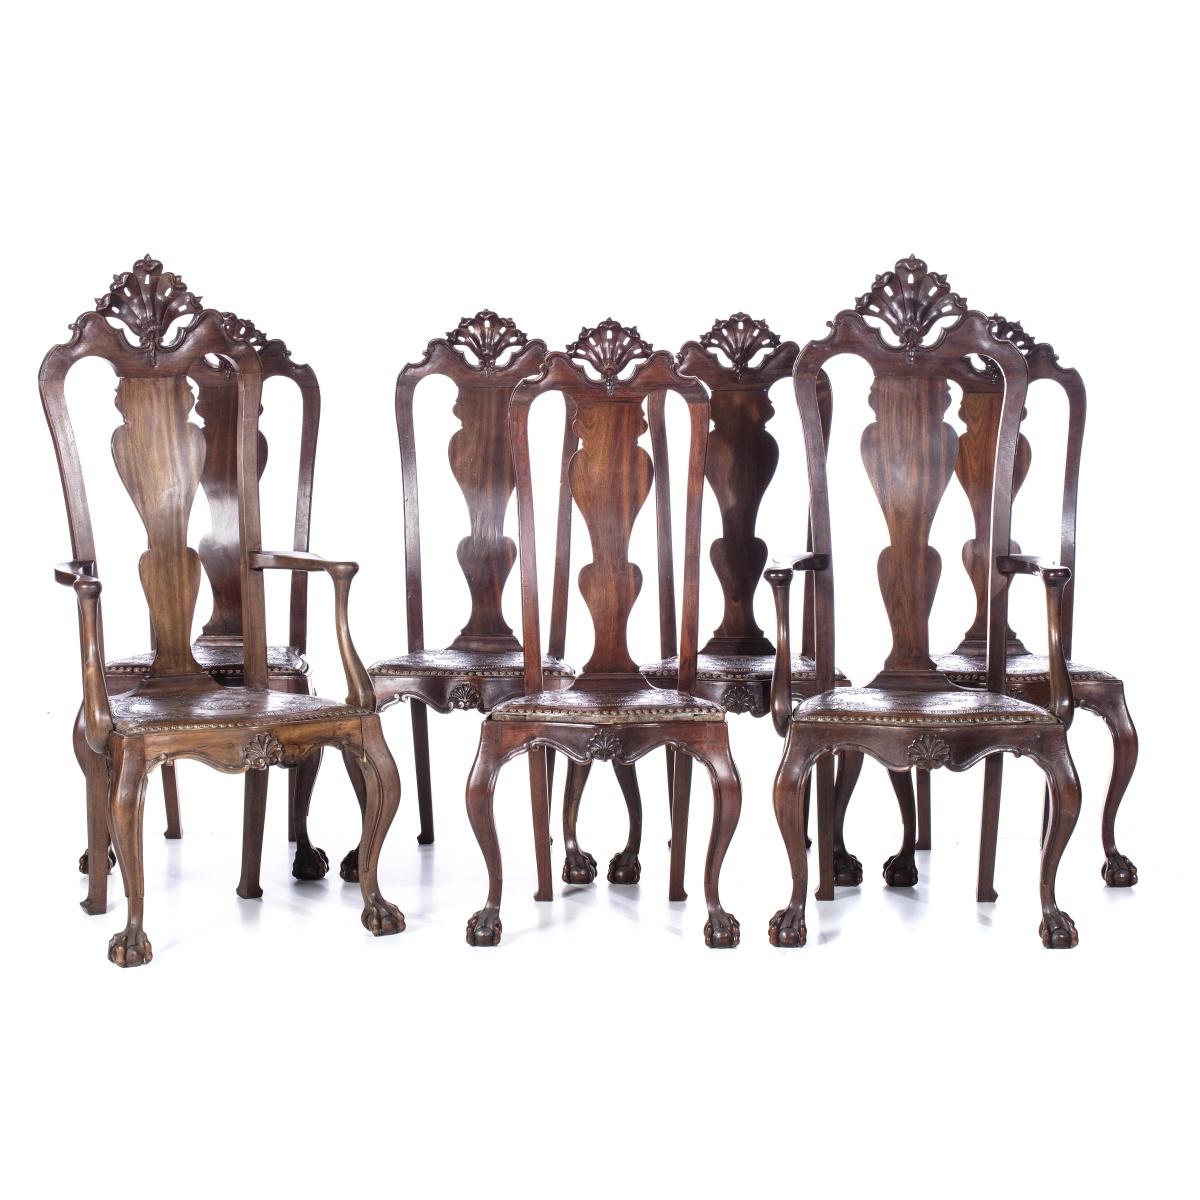 Hand-Crafted Five Chairs and Two Armchairs Portuguese of the 18th Century